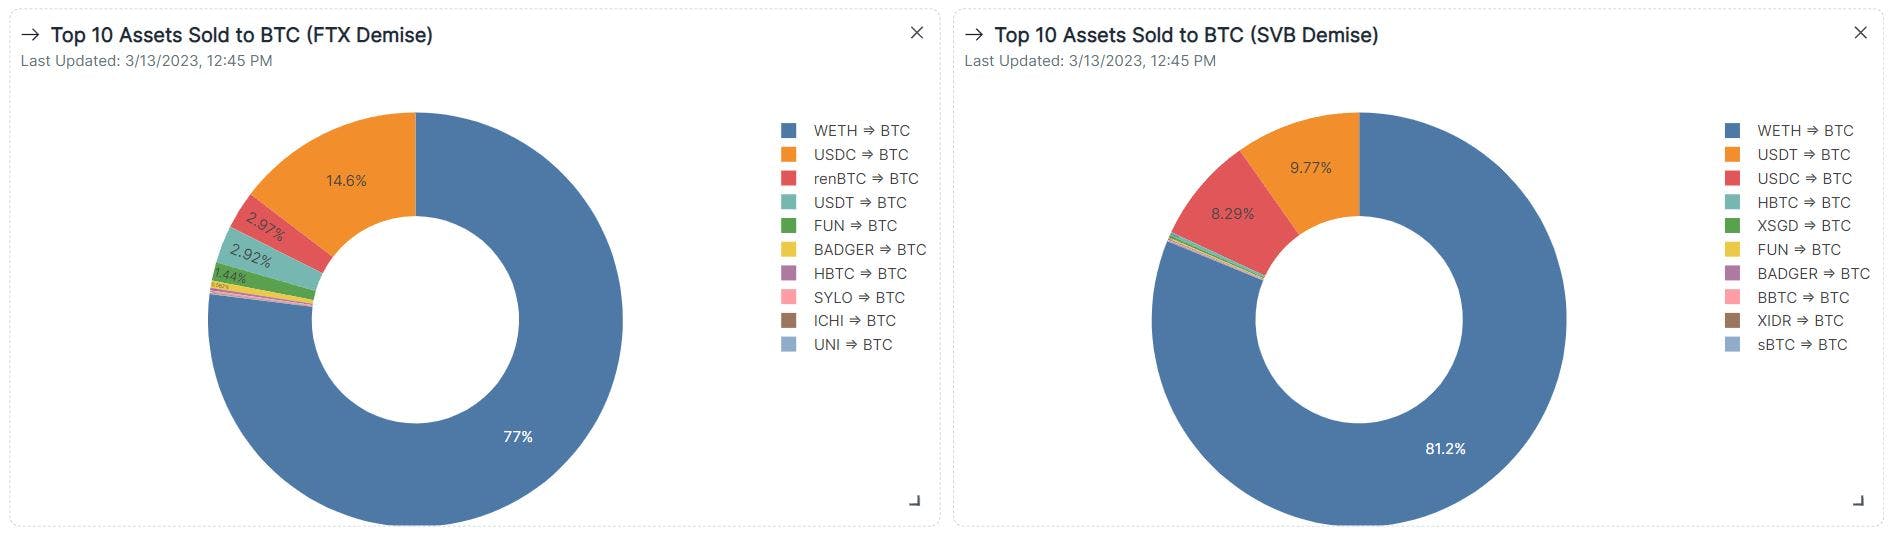 Top 10 most volume assets swapped to BTC